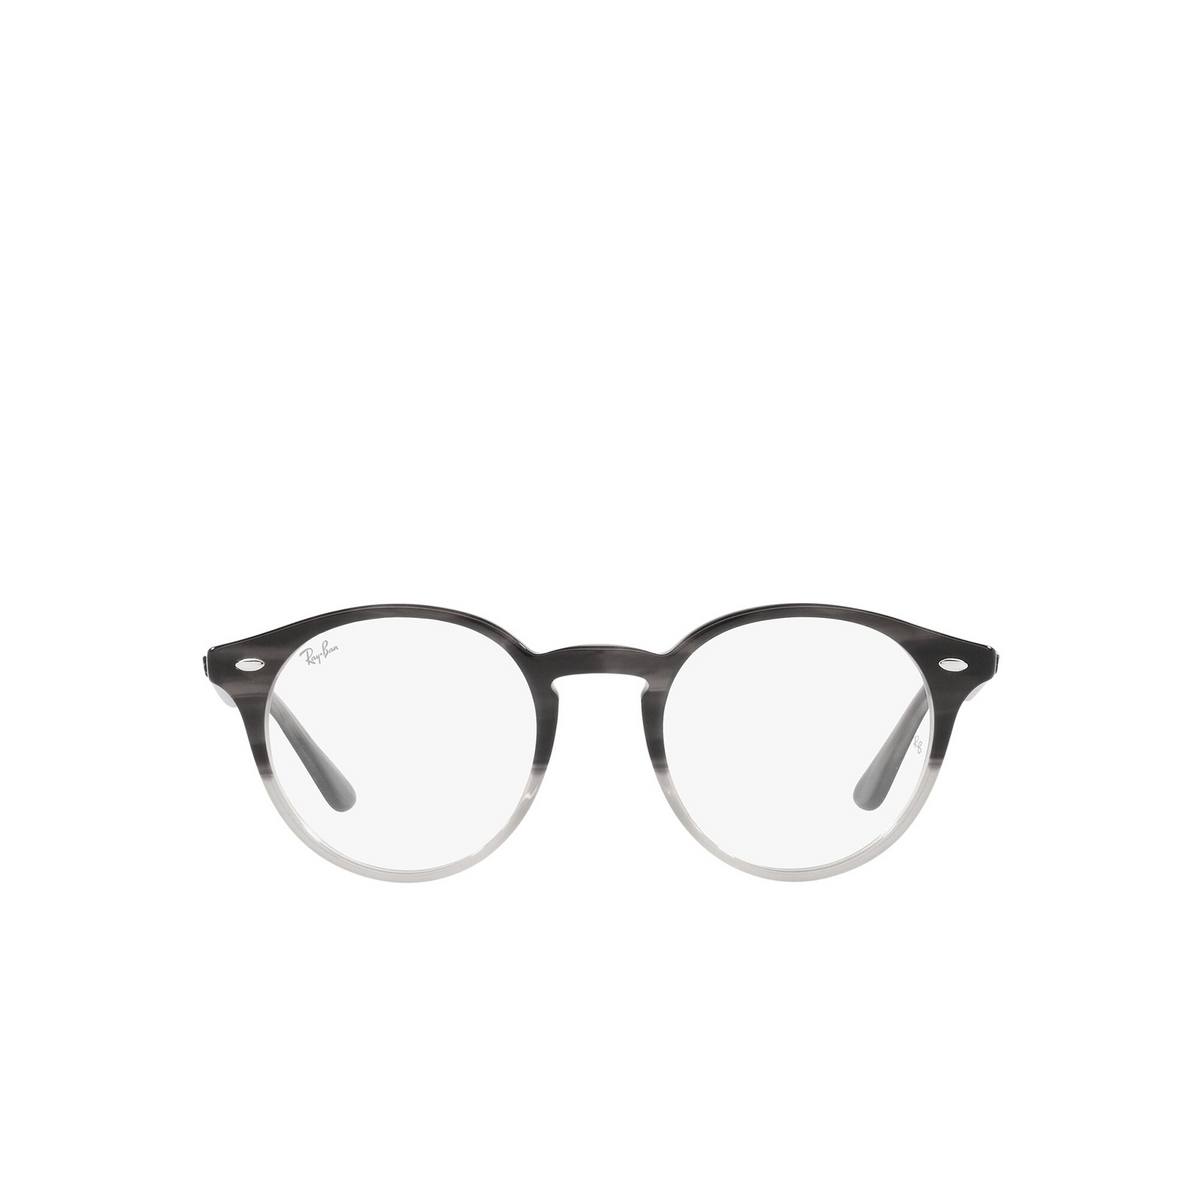 Ray-Ban® Round Eyeglasses: RX2180V color Gradient Grey Havana 8106 - front view.